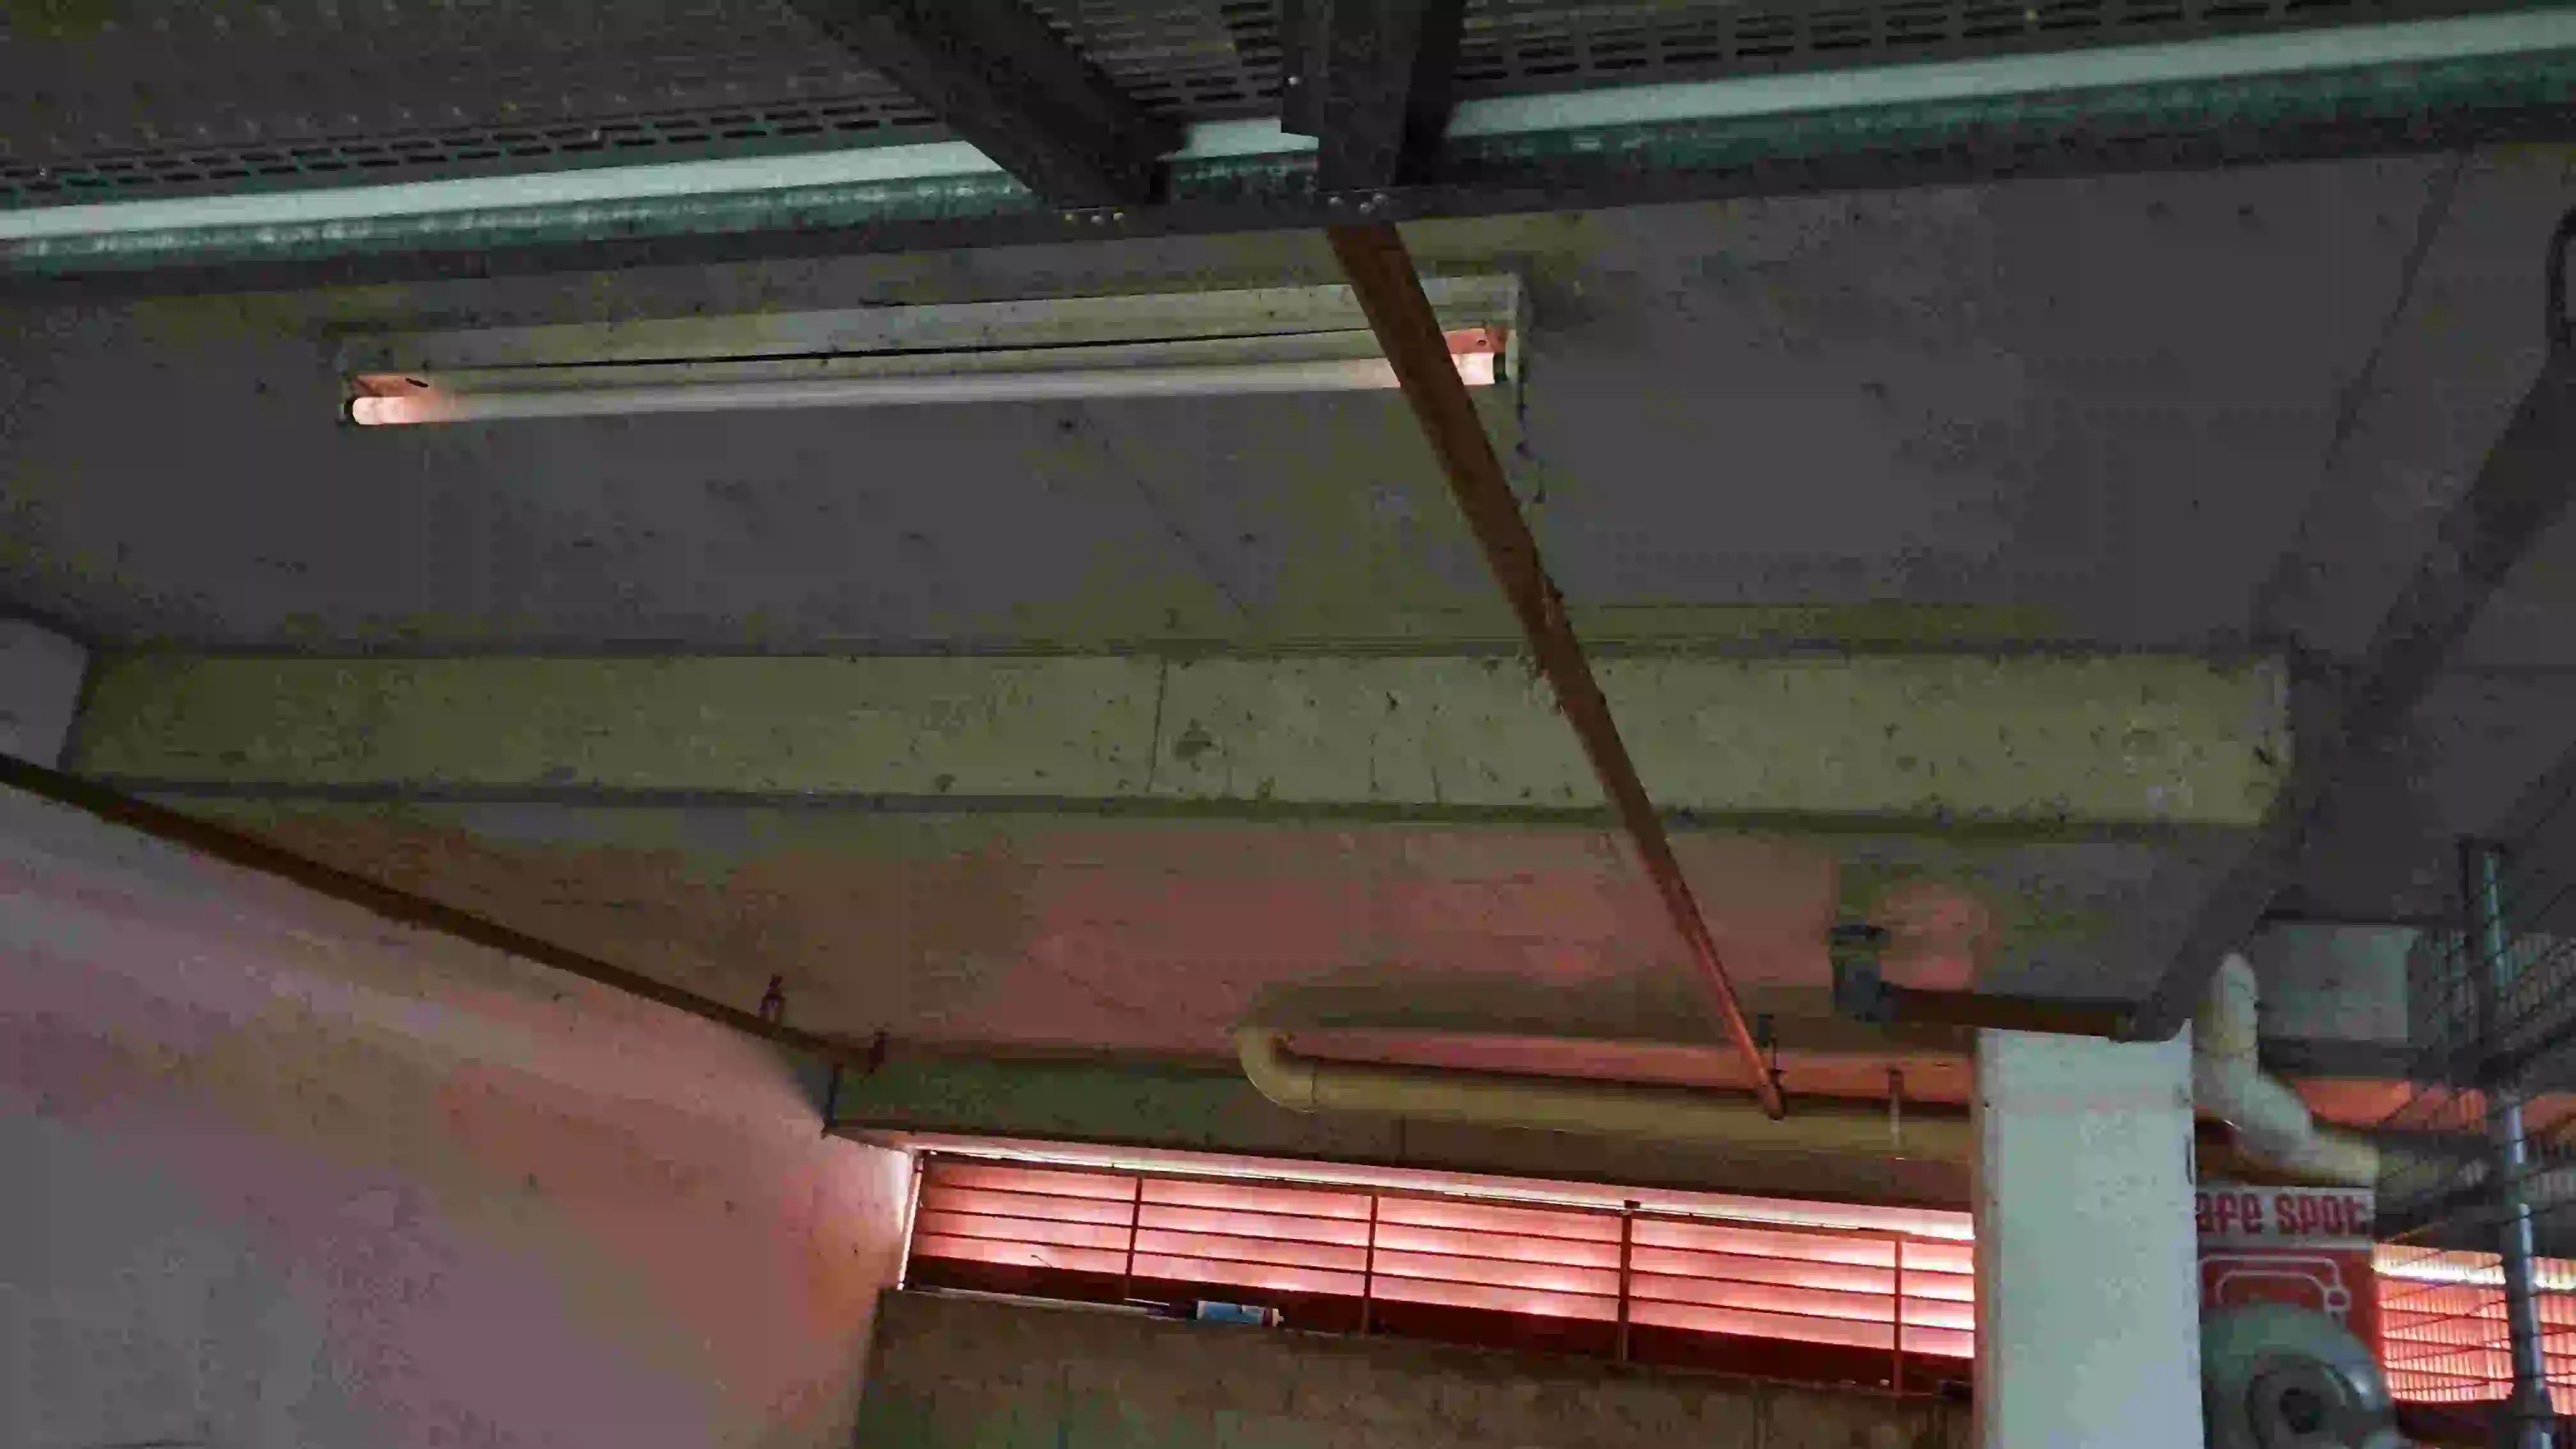 SP52948-Lot-132-garage-faulty-lights-for-two-days-photo-1-13Feb2022.webp